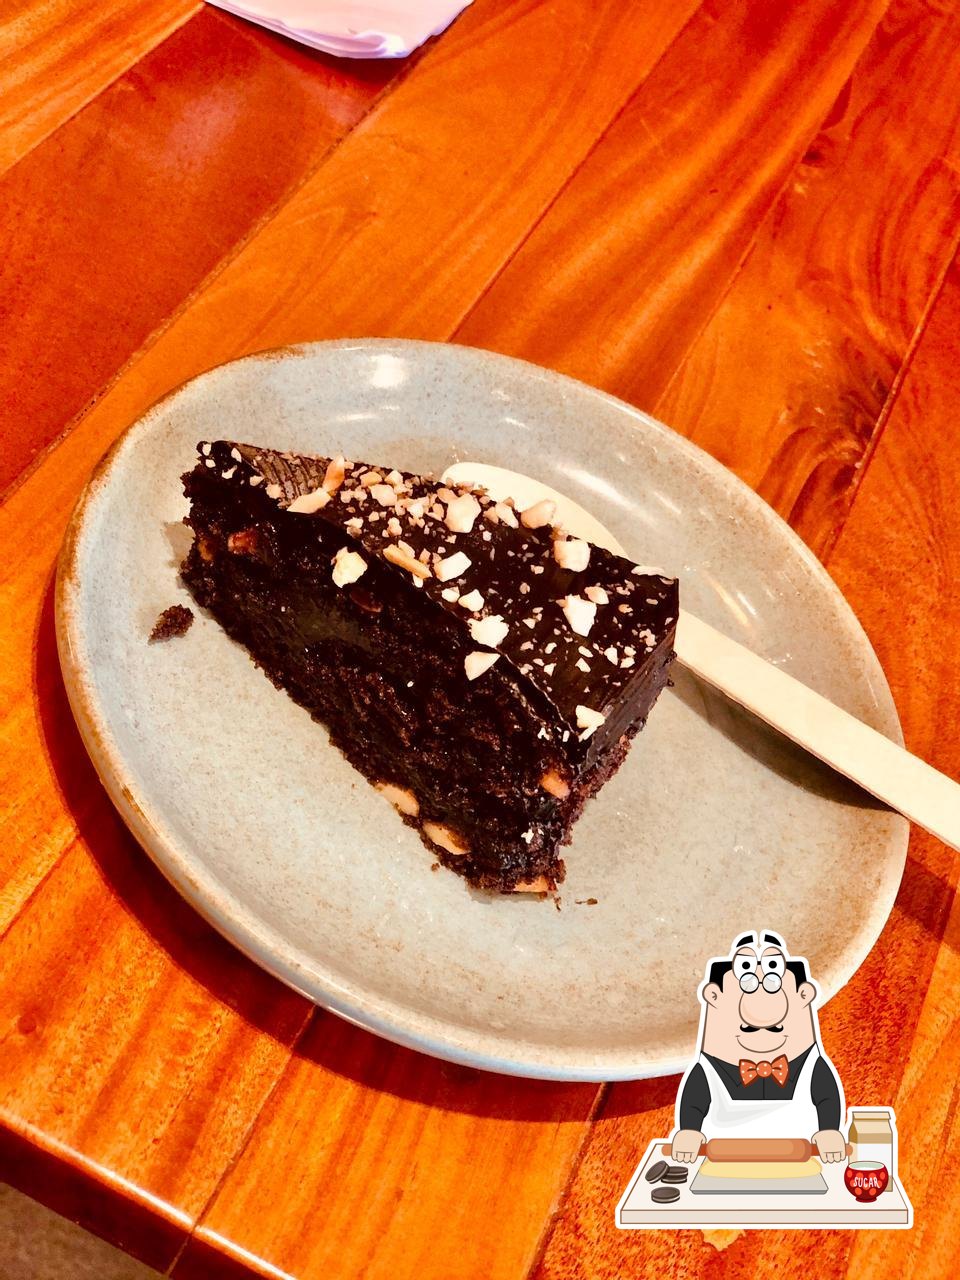 Finch Cafe N Cakes (@finchcafencakes) • Instagram photos and videos